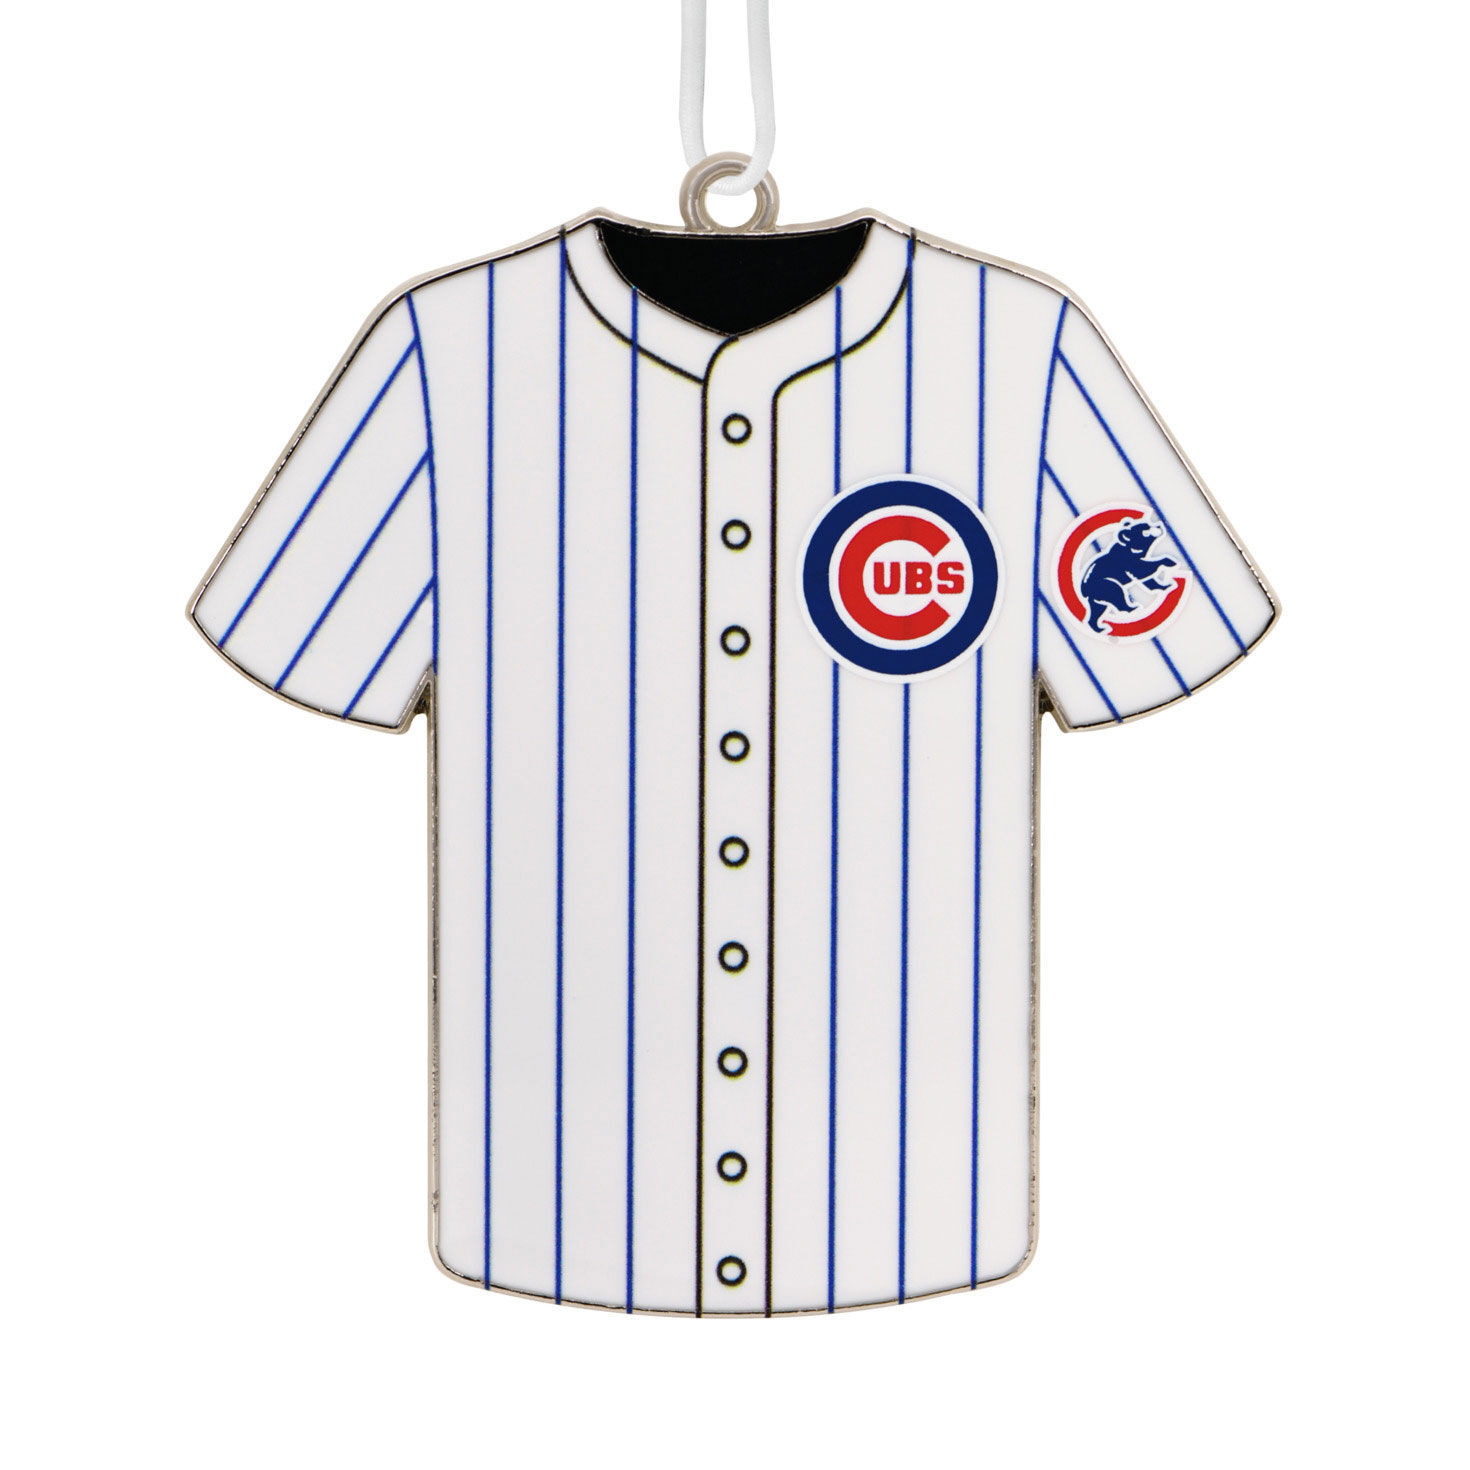 Official Chicago Cubs x Mickey Mouse Baseball Jersey